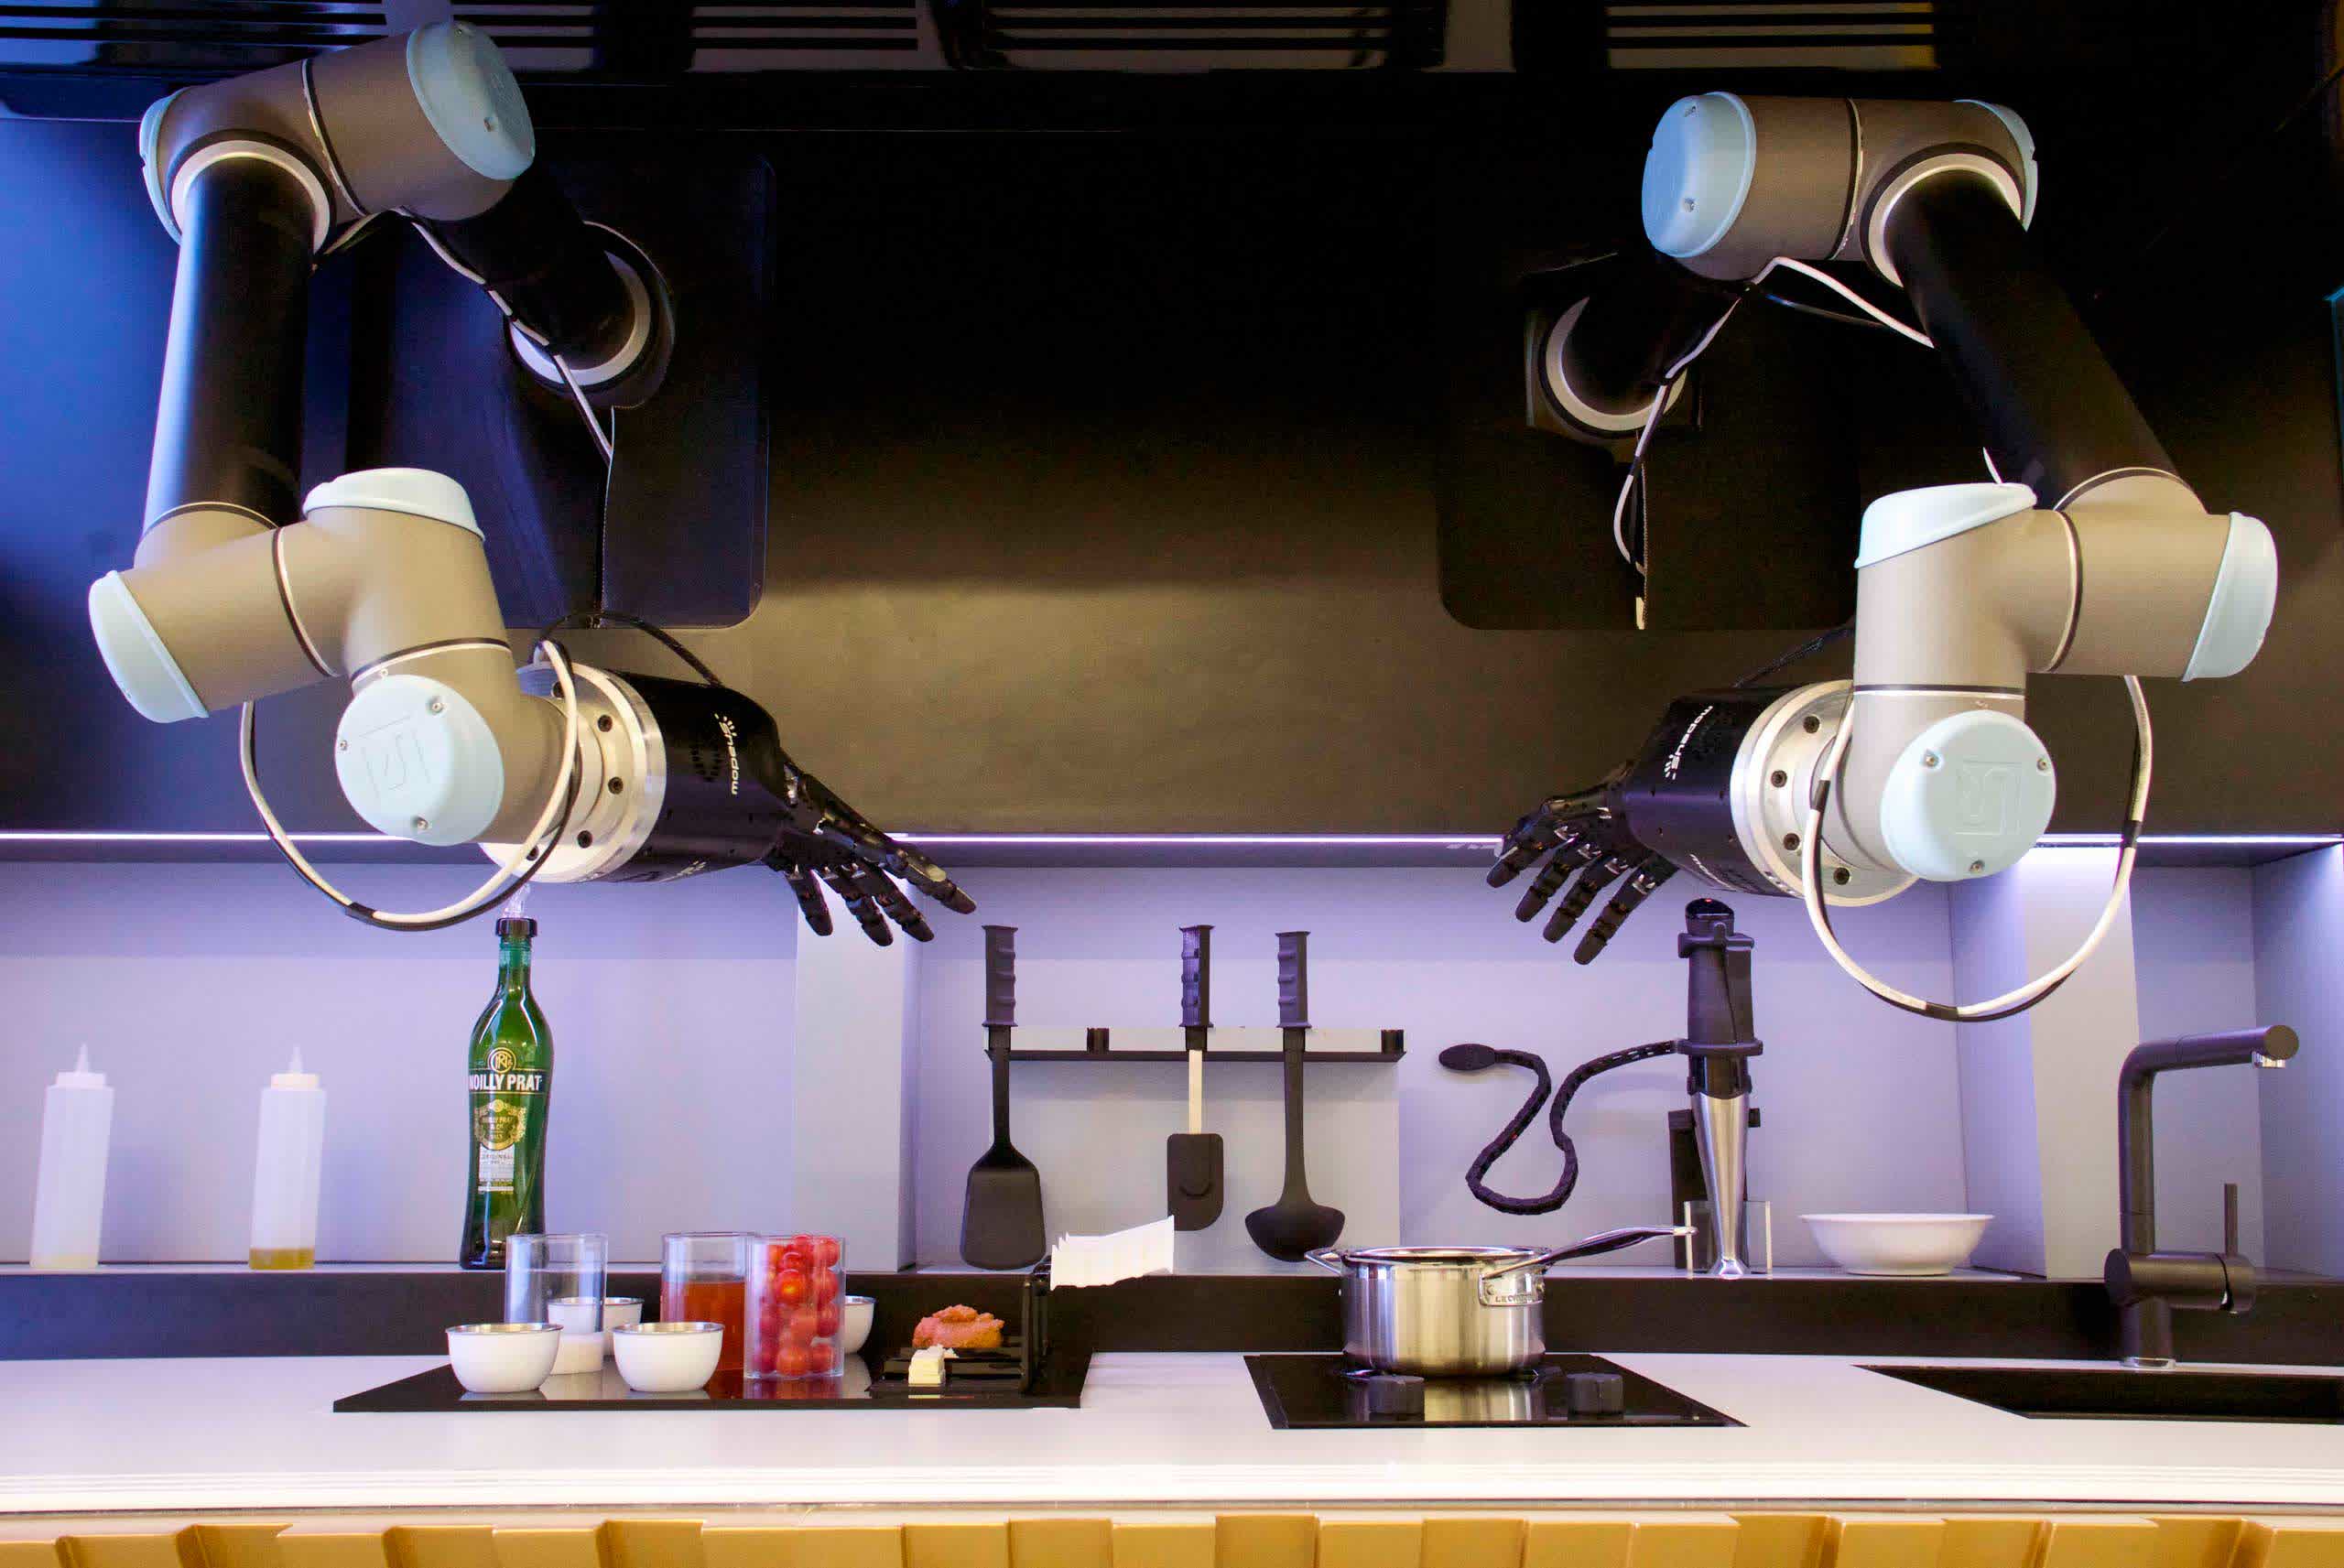 Robot chef can learn recipes by watching food videos